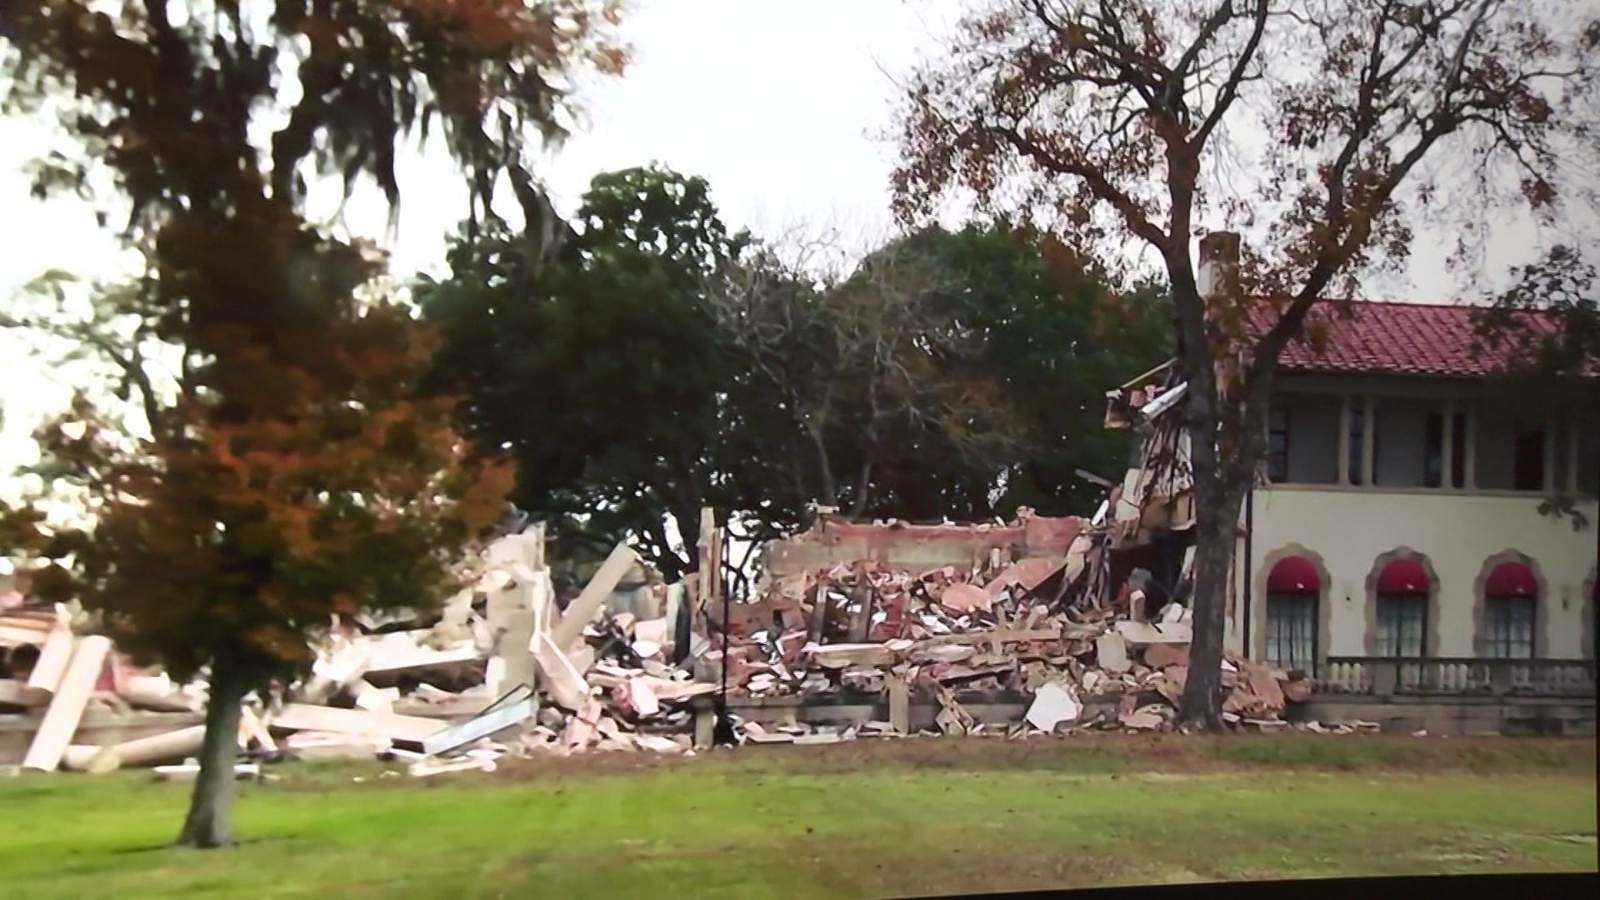 Residents remember West Mansion and mourn its demolition